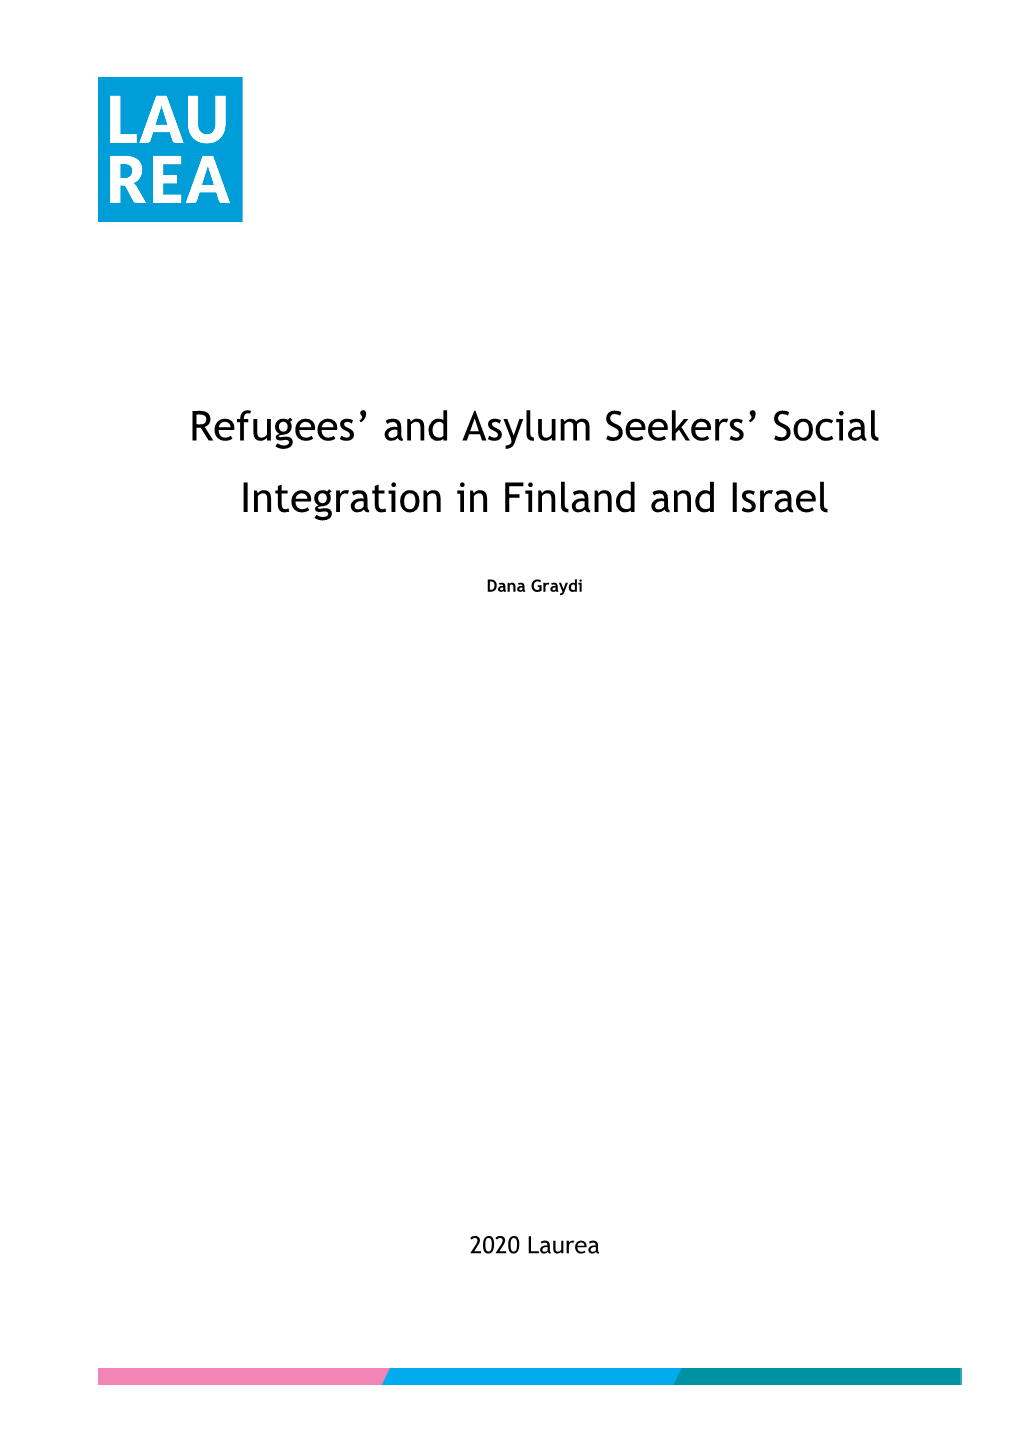 Refugees' and Asylum Seekers' Social Integration in Finland and Israel